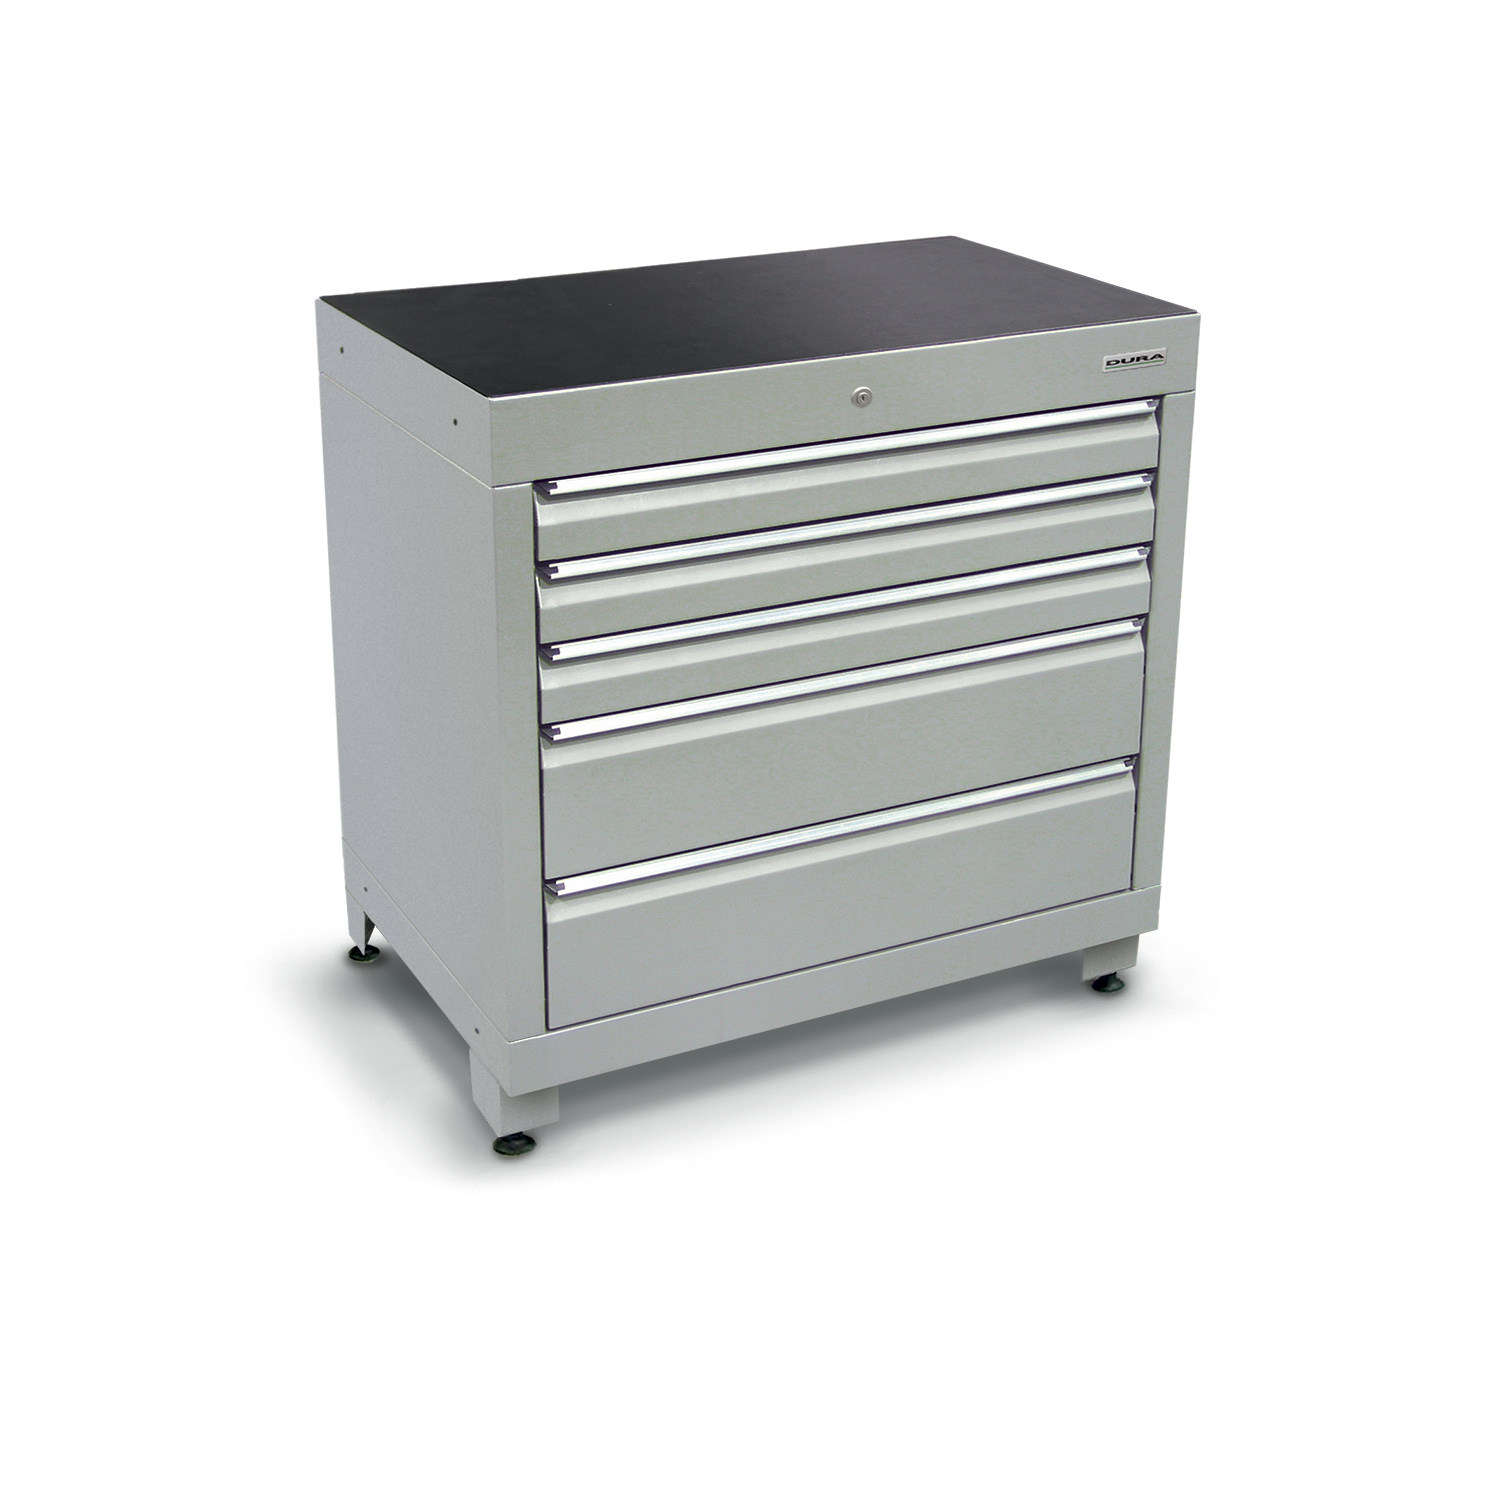 900 series cabinet with 5 drawers (3 medium, 2 large) and feet